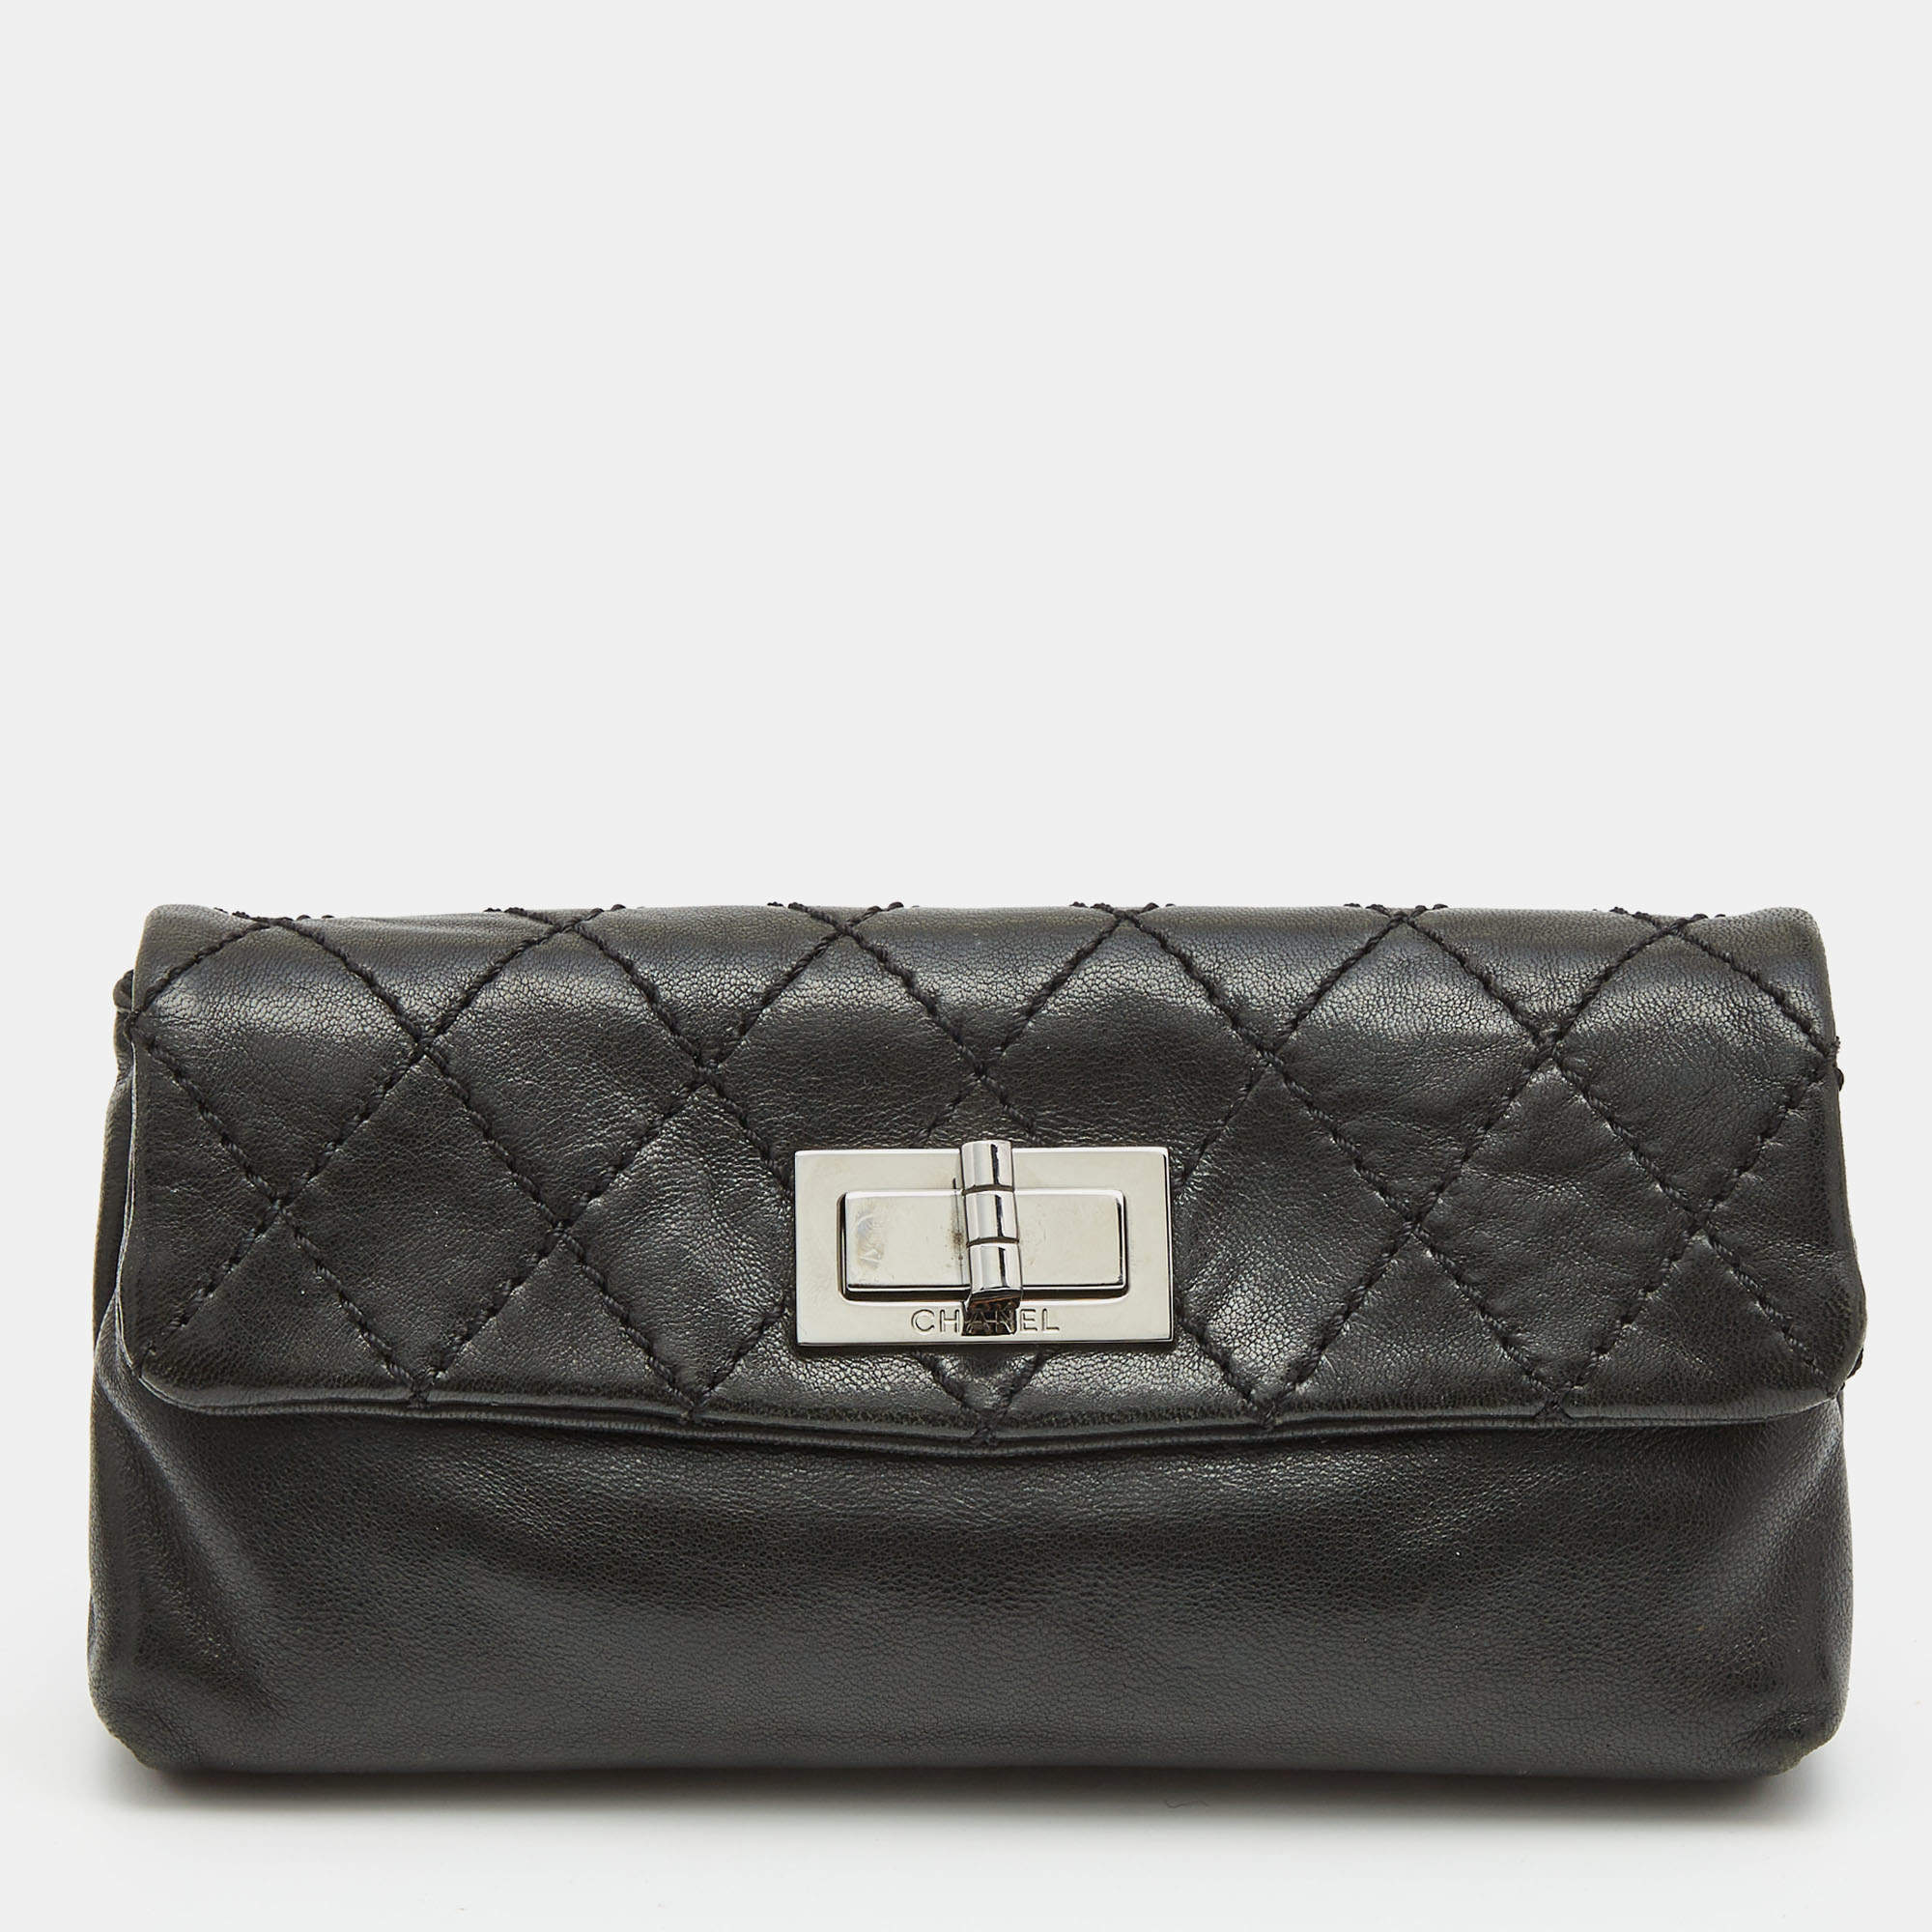 Chanel Black Quilted Leather Mademoiselle Flap Clutch